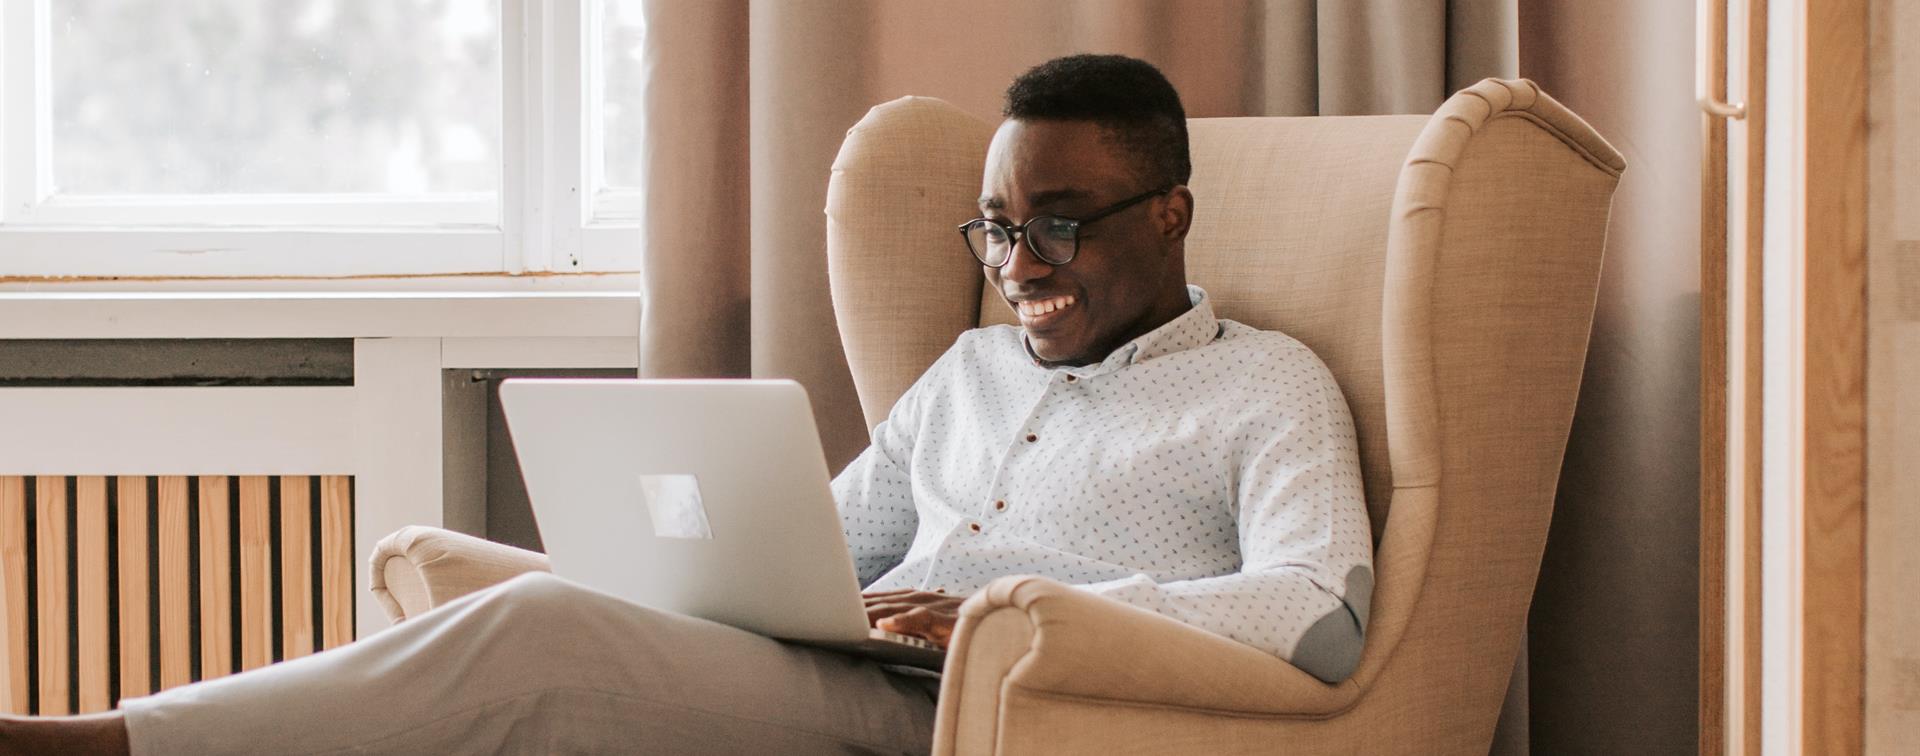 An individual wearing glasses sits in an armchair smiling at a laptop.